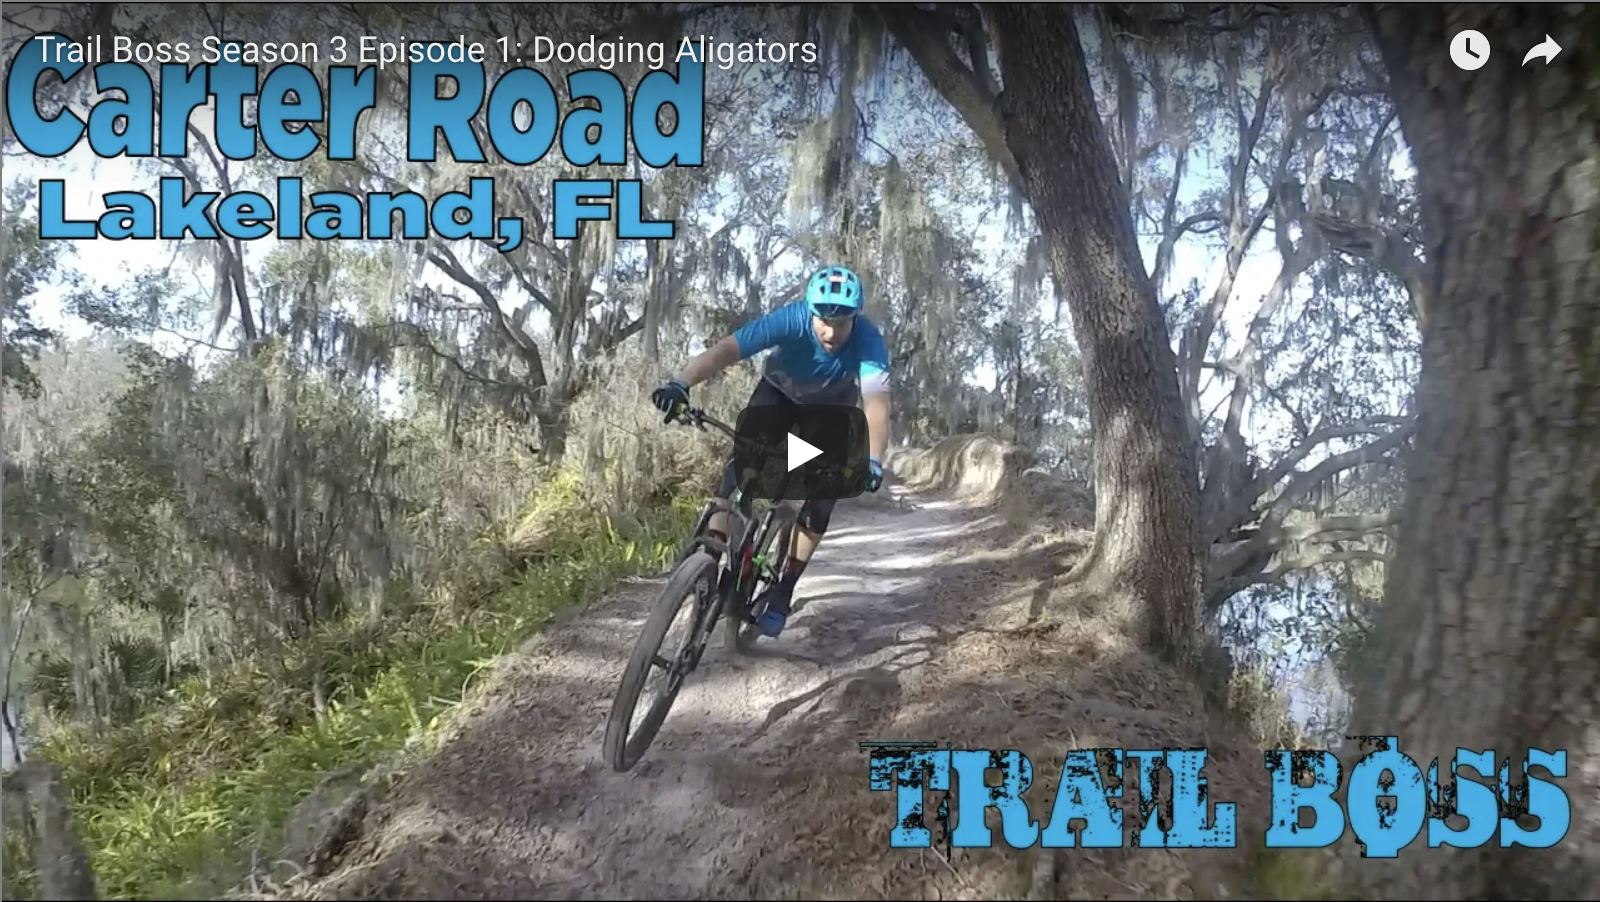 Video: Trail Boss – 3 Fingers at Carter Road, Florida